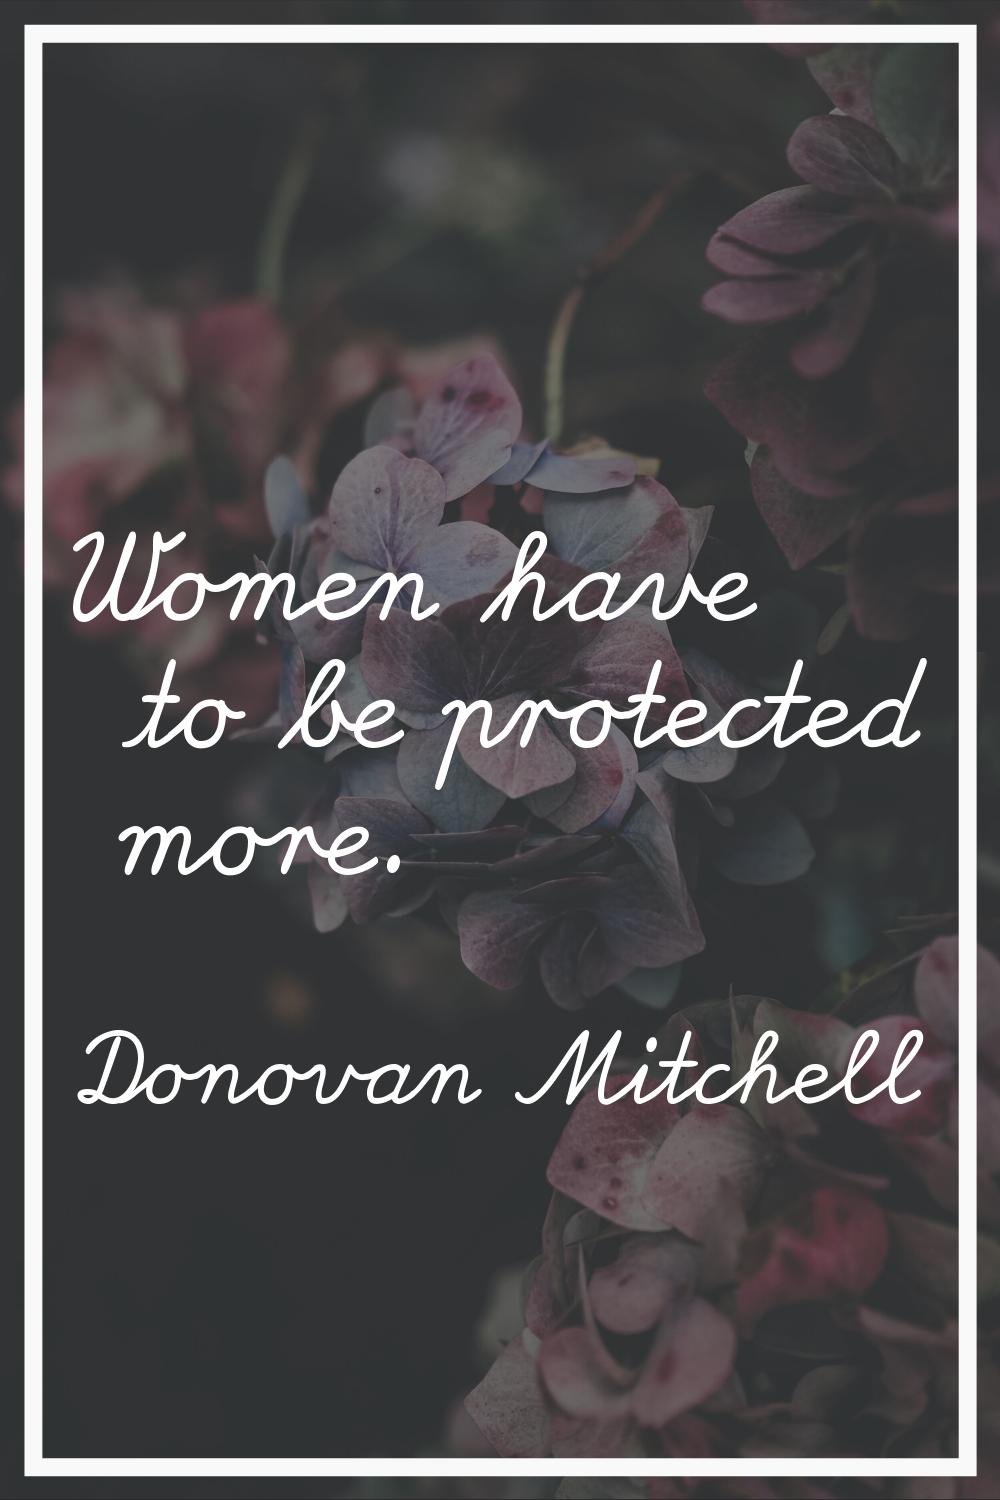 Women have to be protected more.